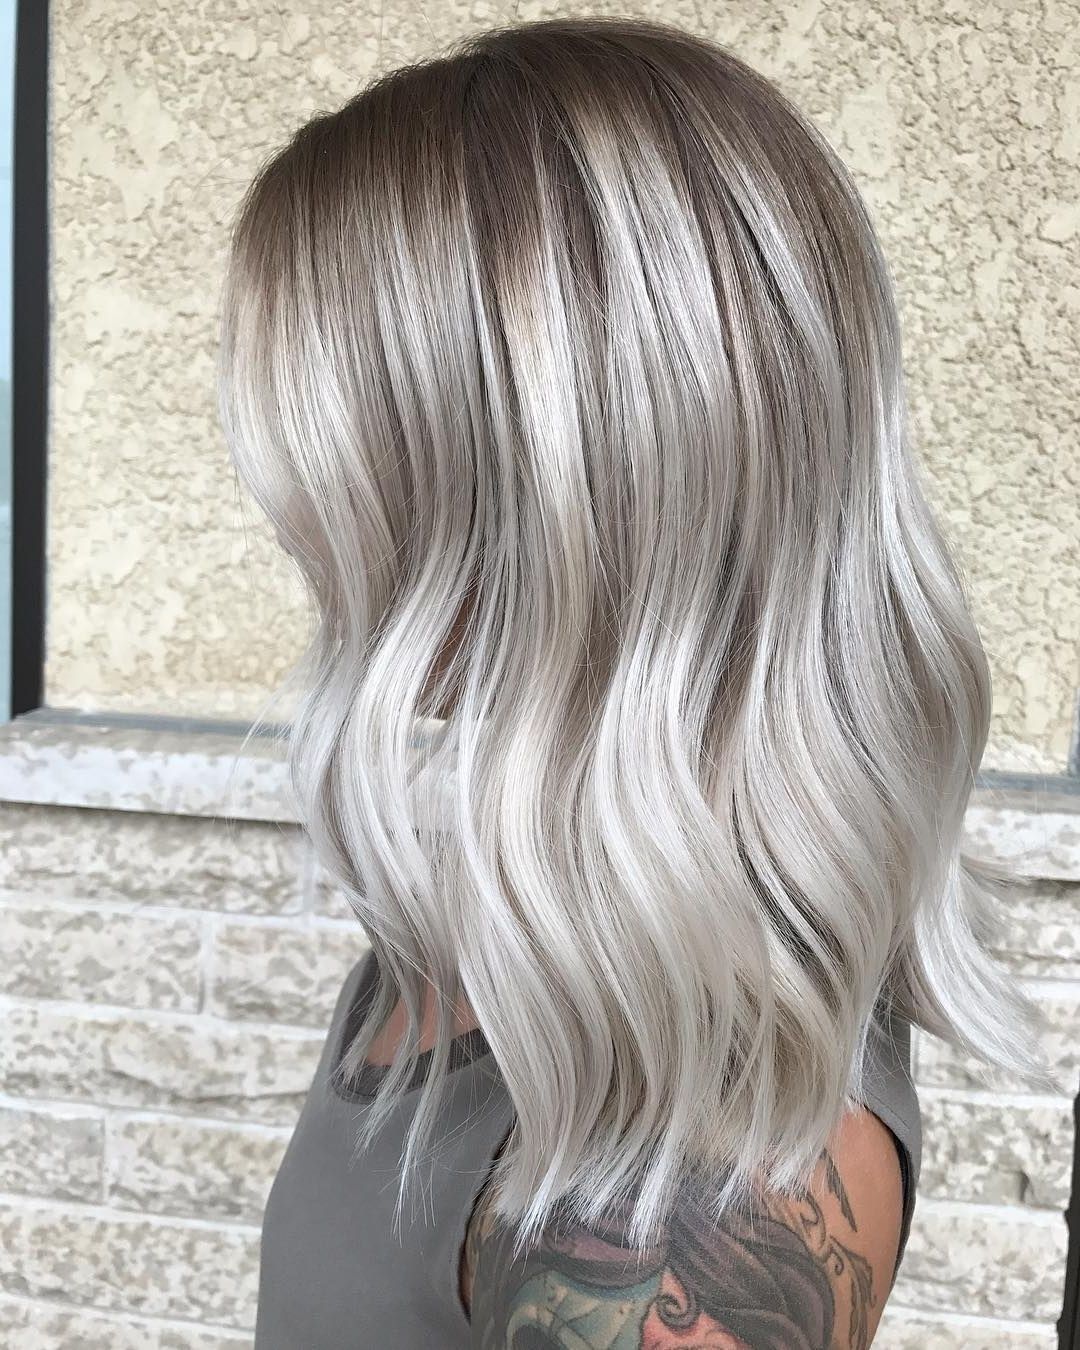 Well Liked Long Blonde Bob Hairstyles In Silver White Regarding 10 Ash Blonde Hairstyles For All Skin Tones, 2018 Best Hair Color Trends (View 6 of 20)